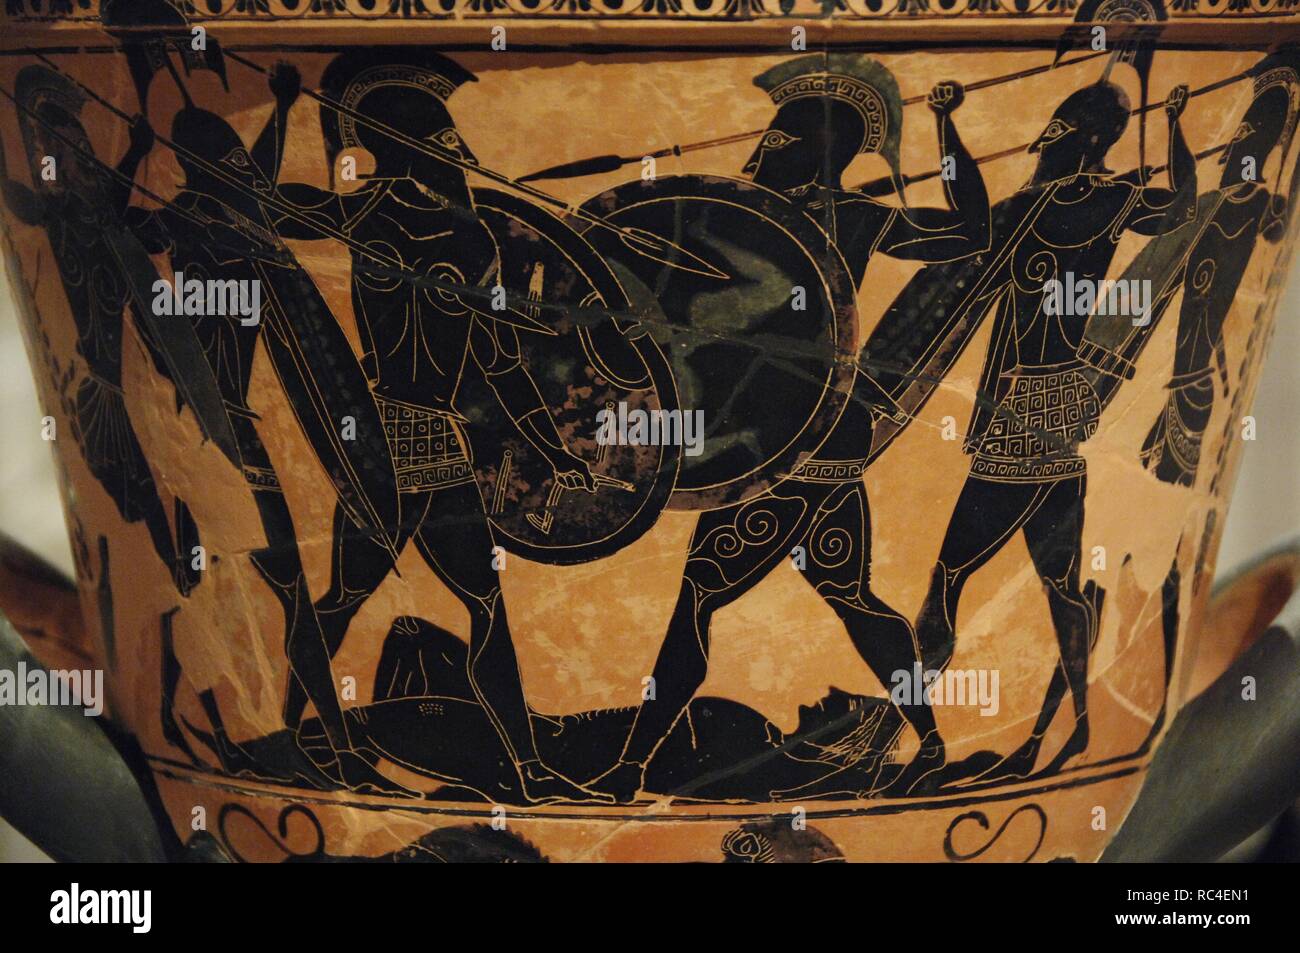 Greek art. Attic krater painted with black figures representing an Homeric battle around the body of a dead warrior (possibly Patroclus). Found at Pharsala. Dated circa 530 BCE. Detail. National Archaeological Museum. Athens. Greece. Stock Photo